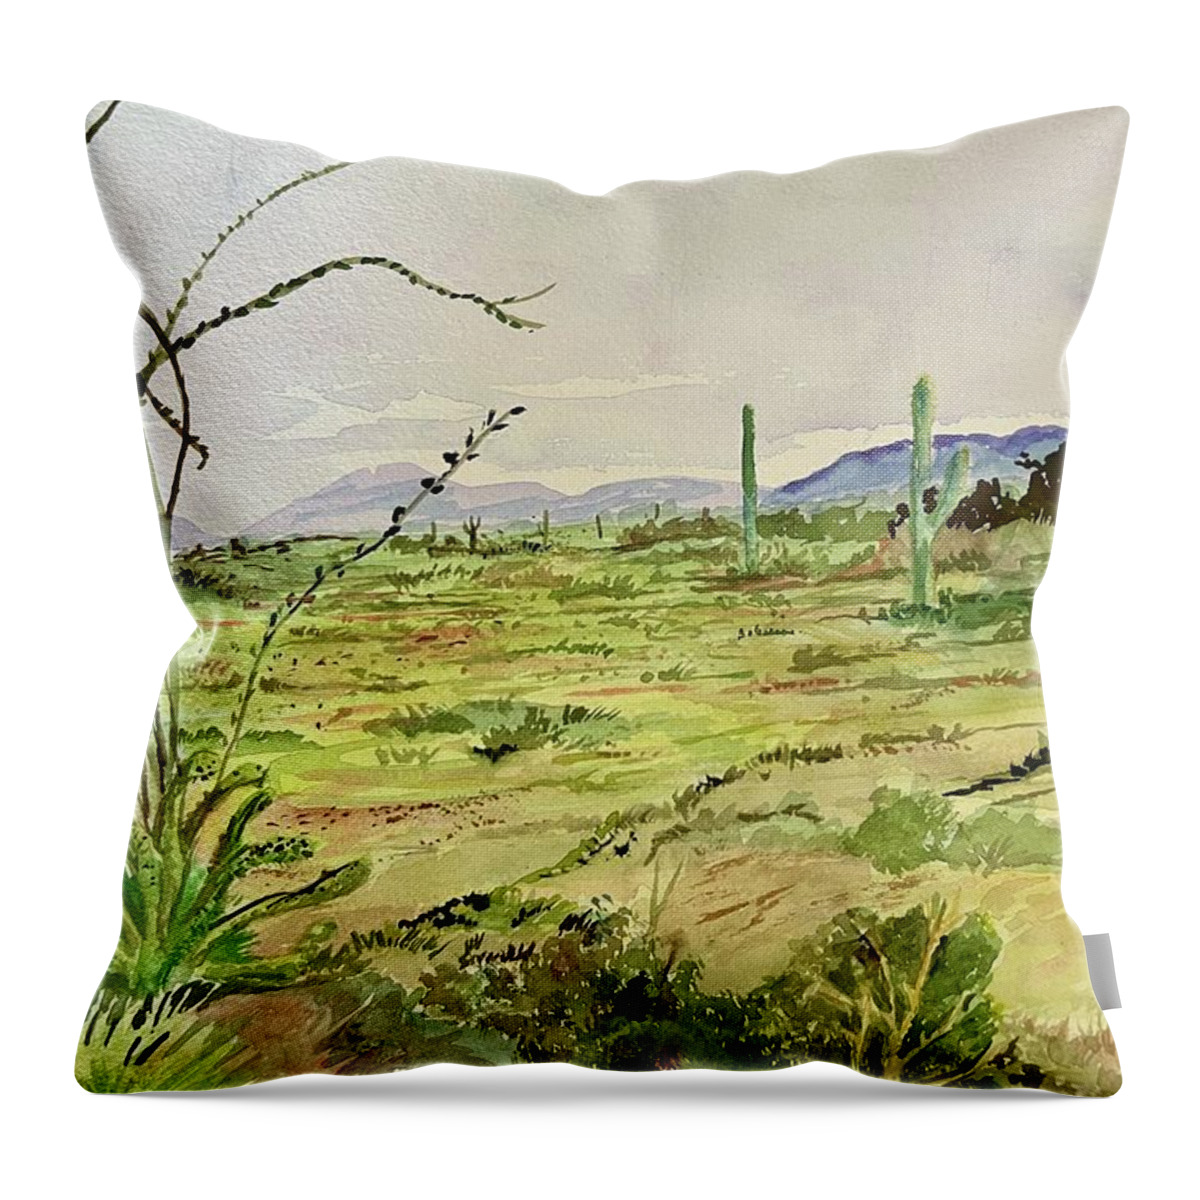 Dessert Throw Pillow featuring the painting Desert Vista by Charme Curtin